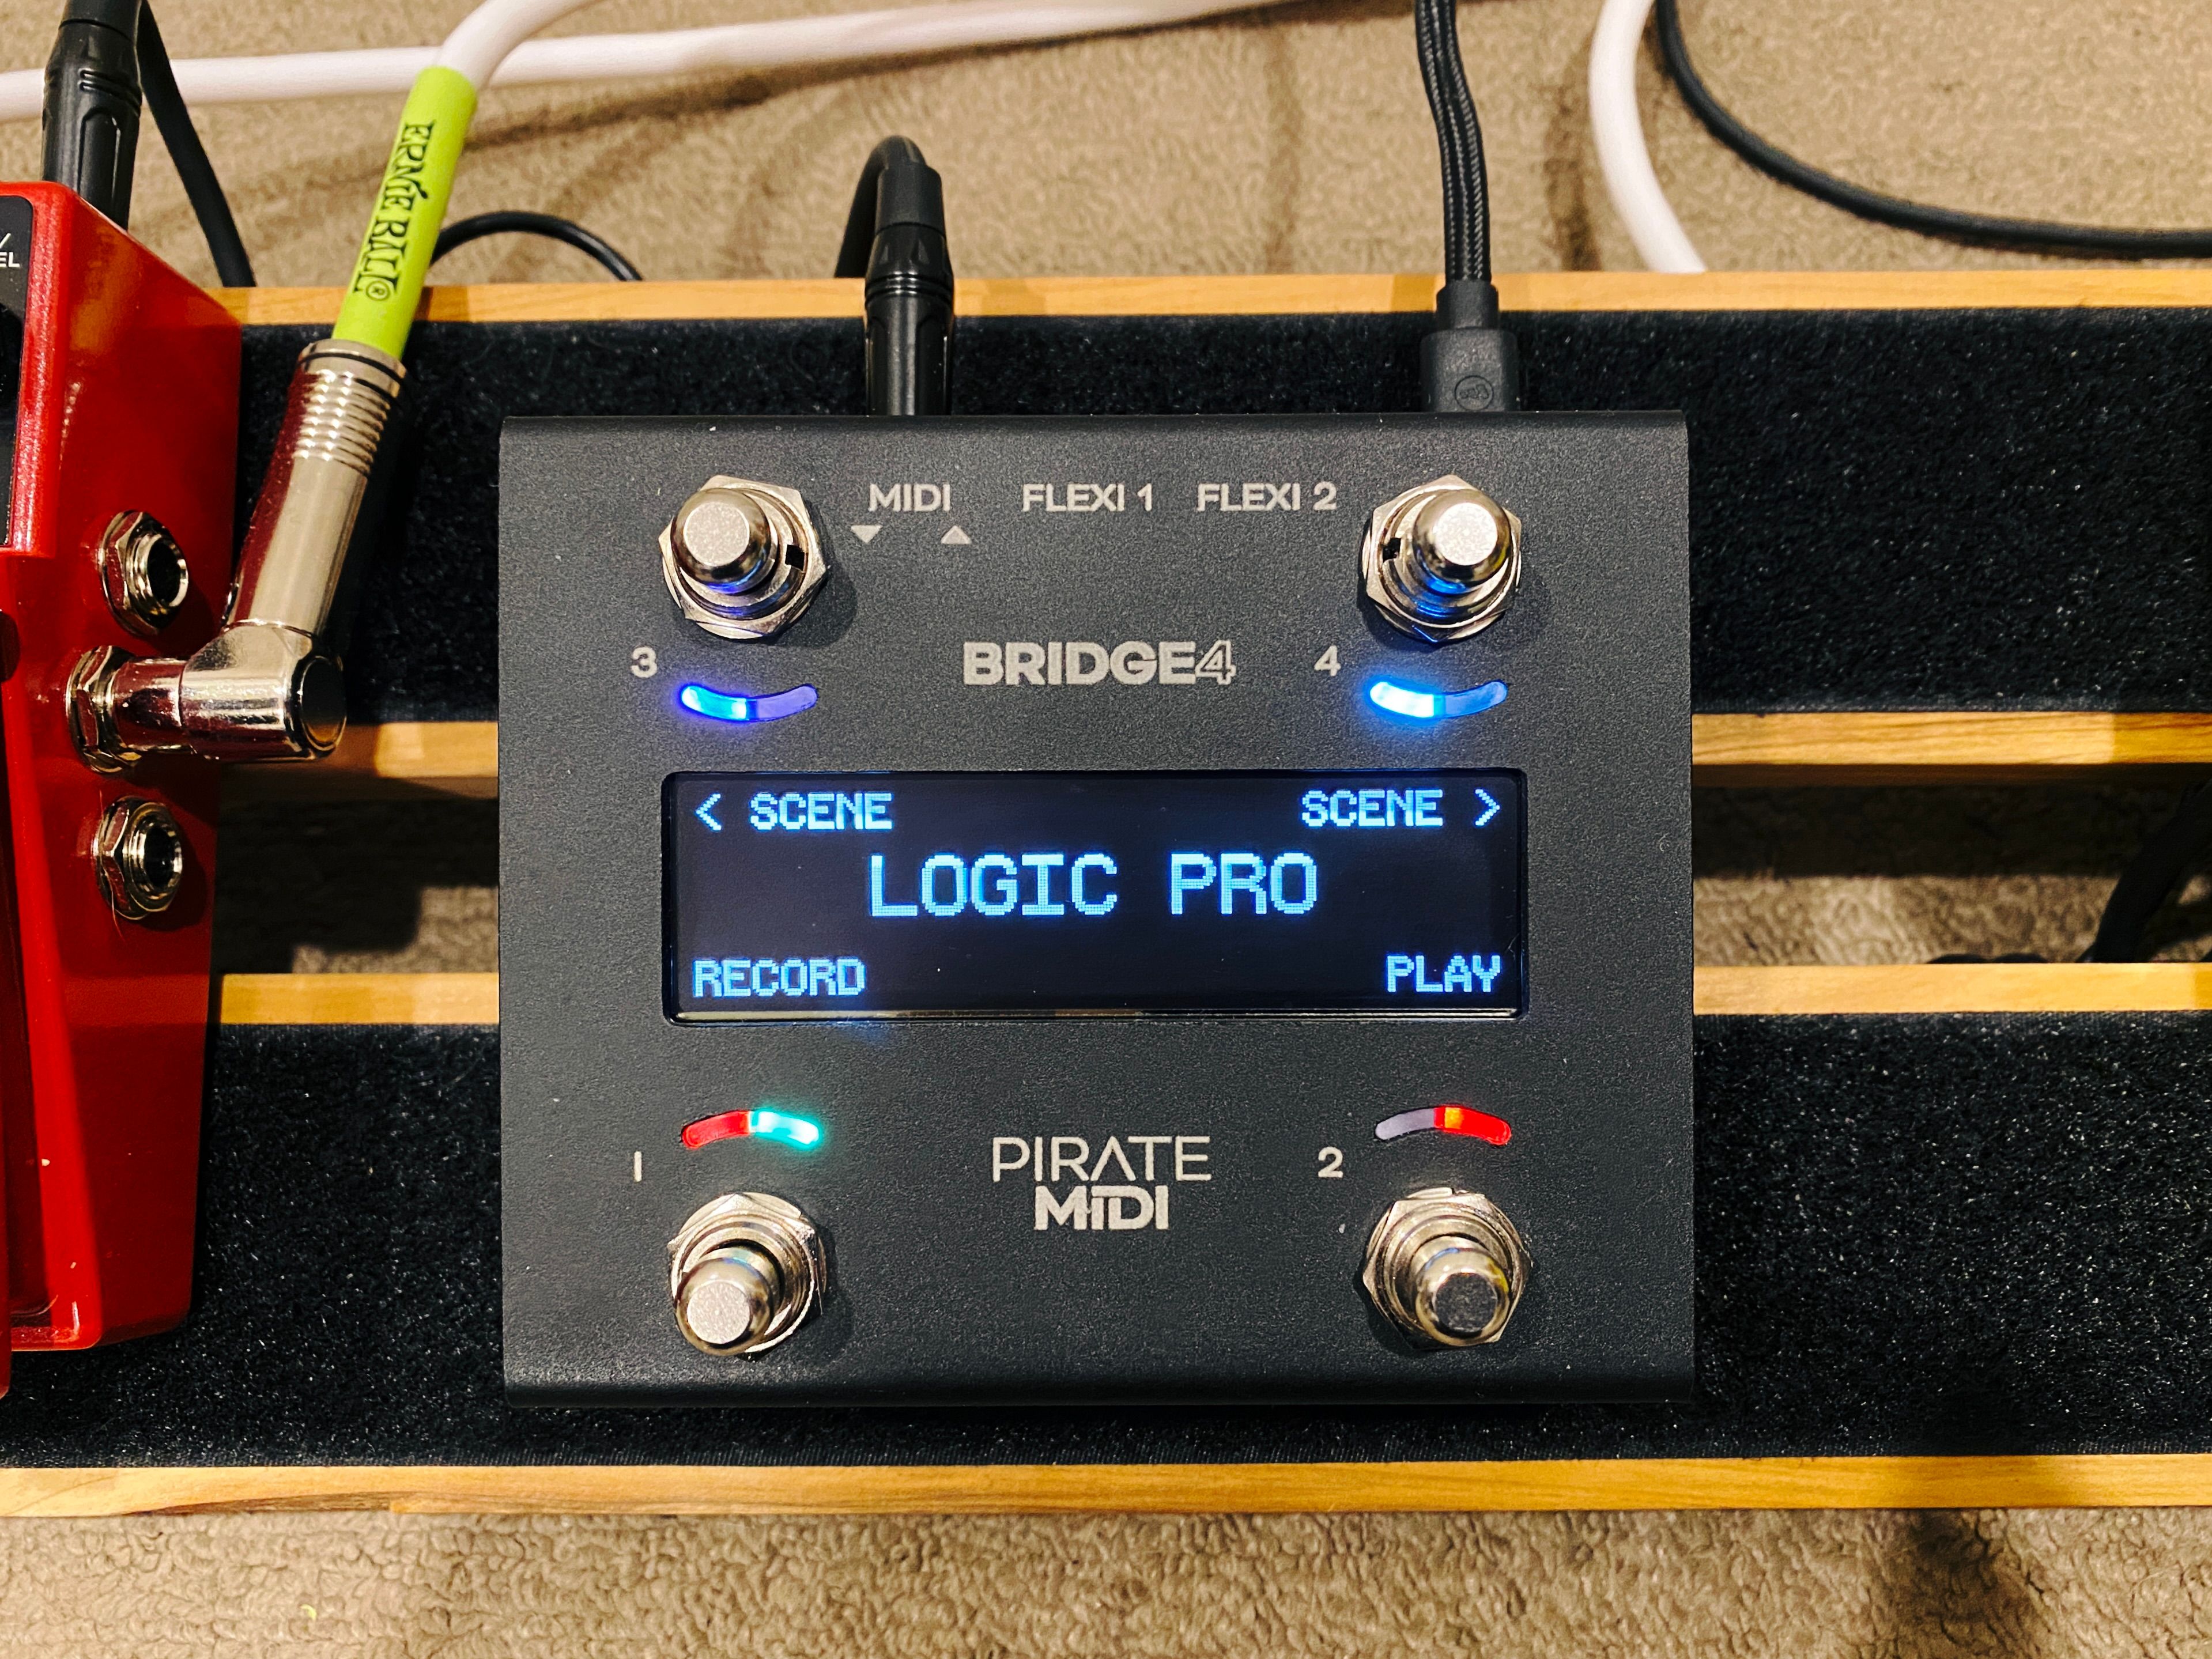 A photo of a black metal box with four silver push switches and an LCD display in the middle. The display says "LOGIC PRO" in the middle with "Record", "Play", "Previous Scene" and "Next Scene" in the corners corresponding to each switch.